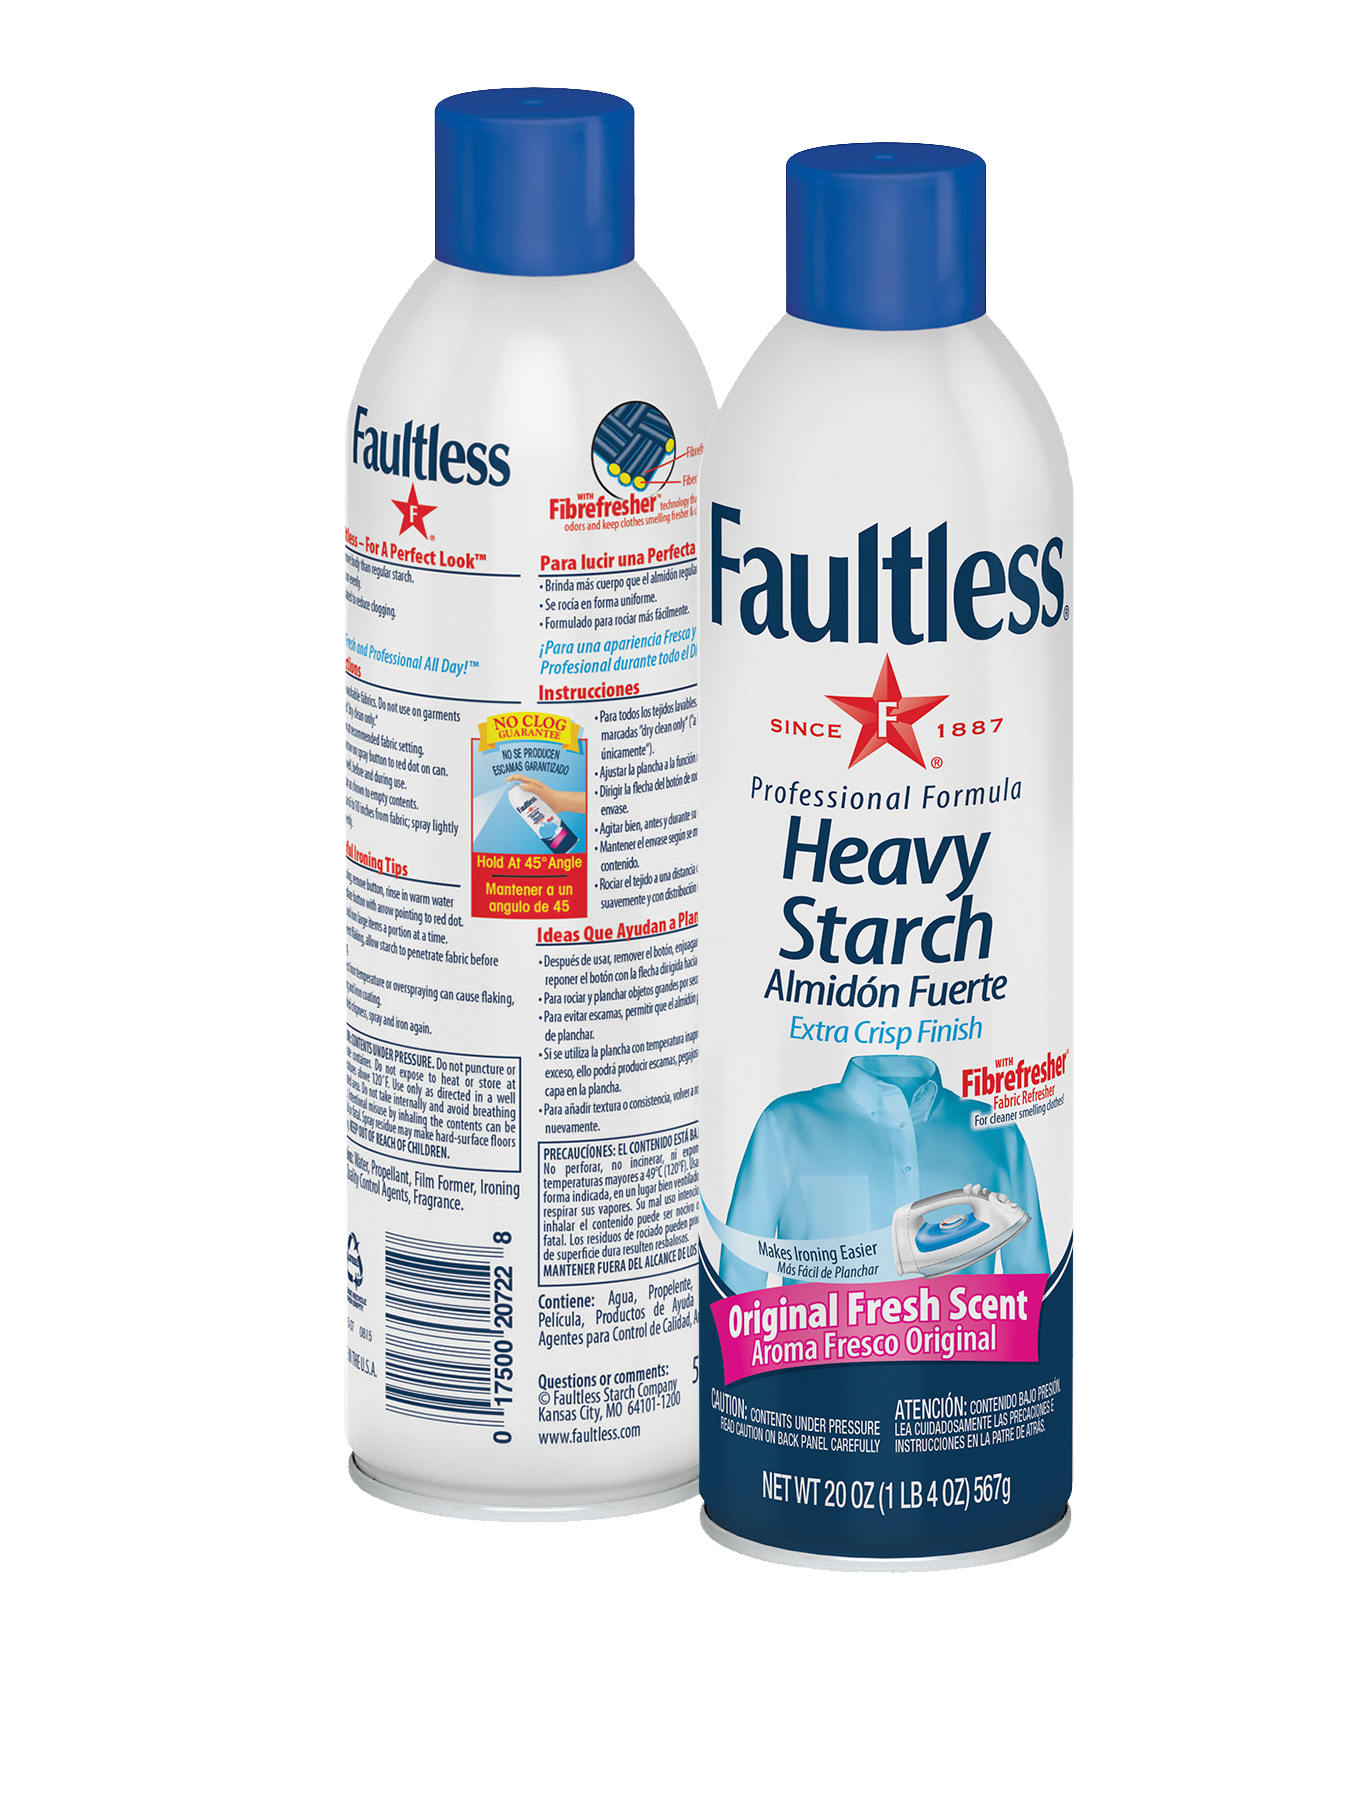 FAULTLESS HEAVY STARCH